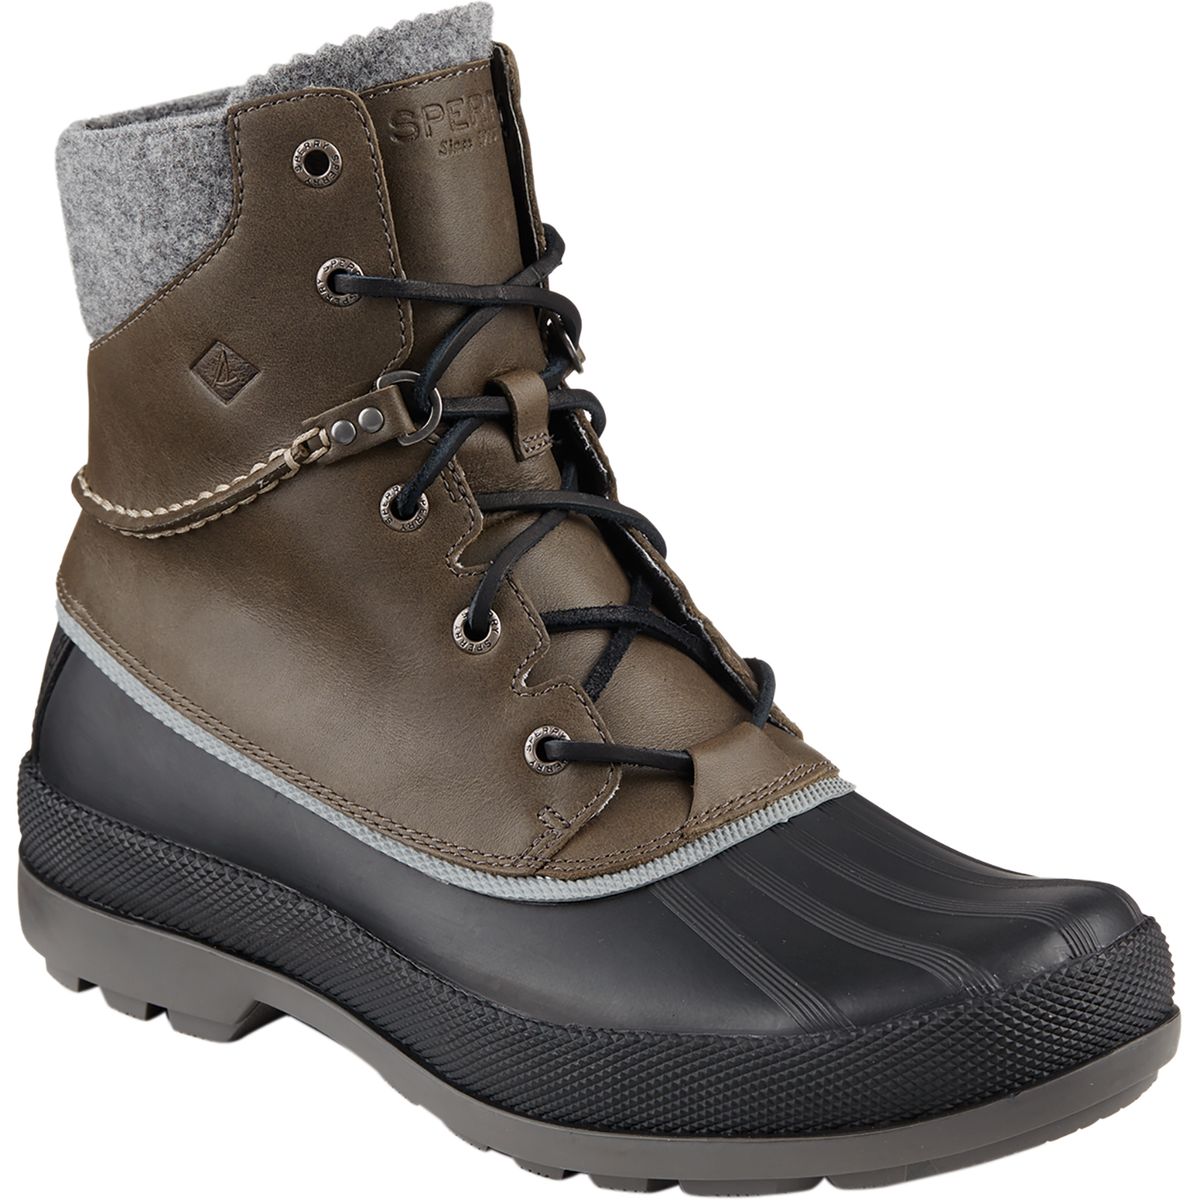 Sperry Top-Sider Cold Bay with Vibram Arctic Grip Boot - Men's - Footwear